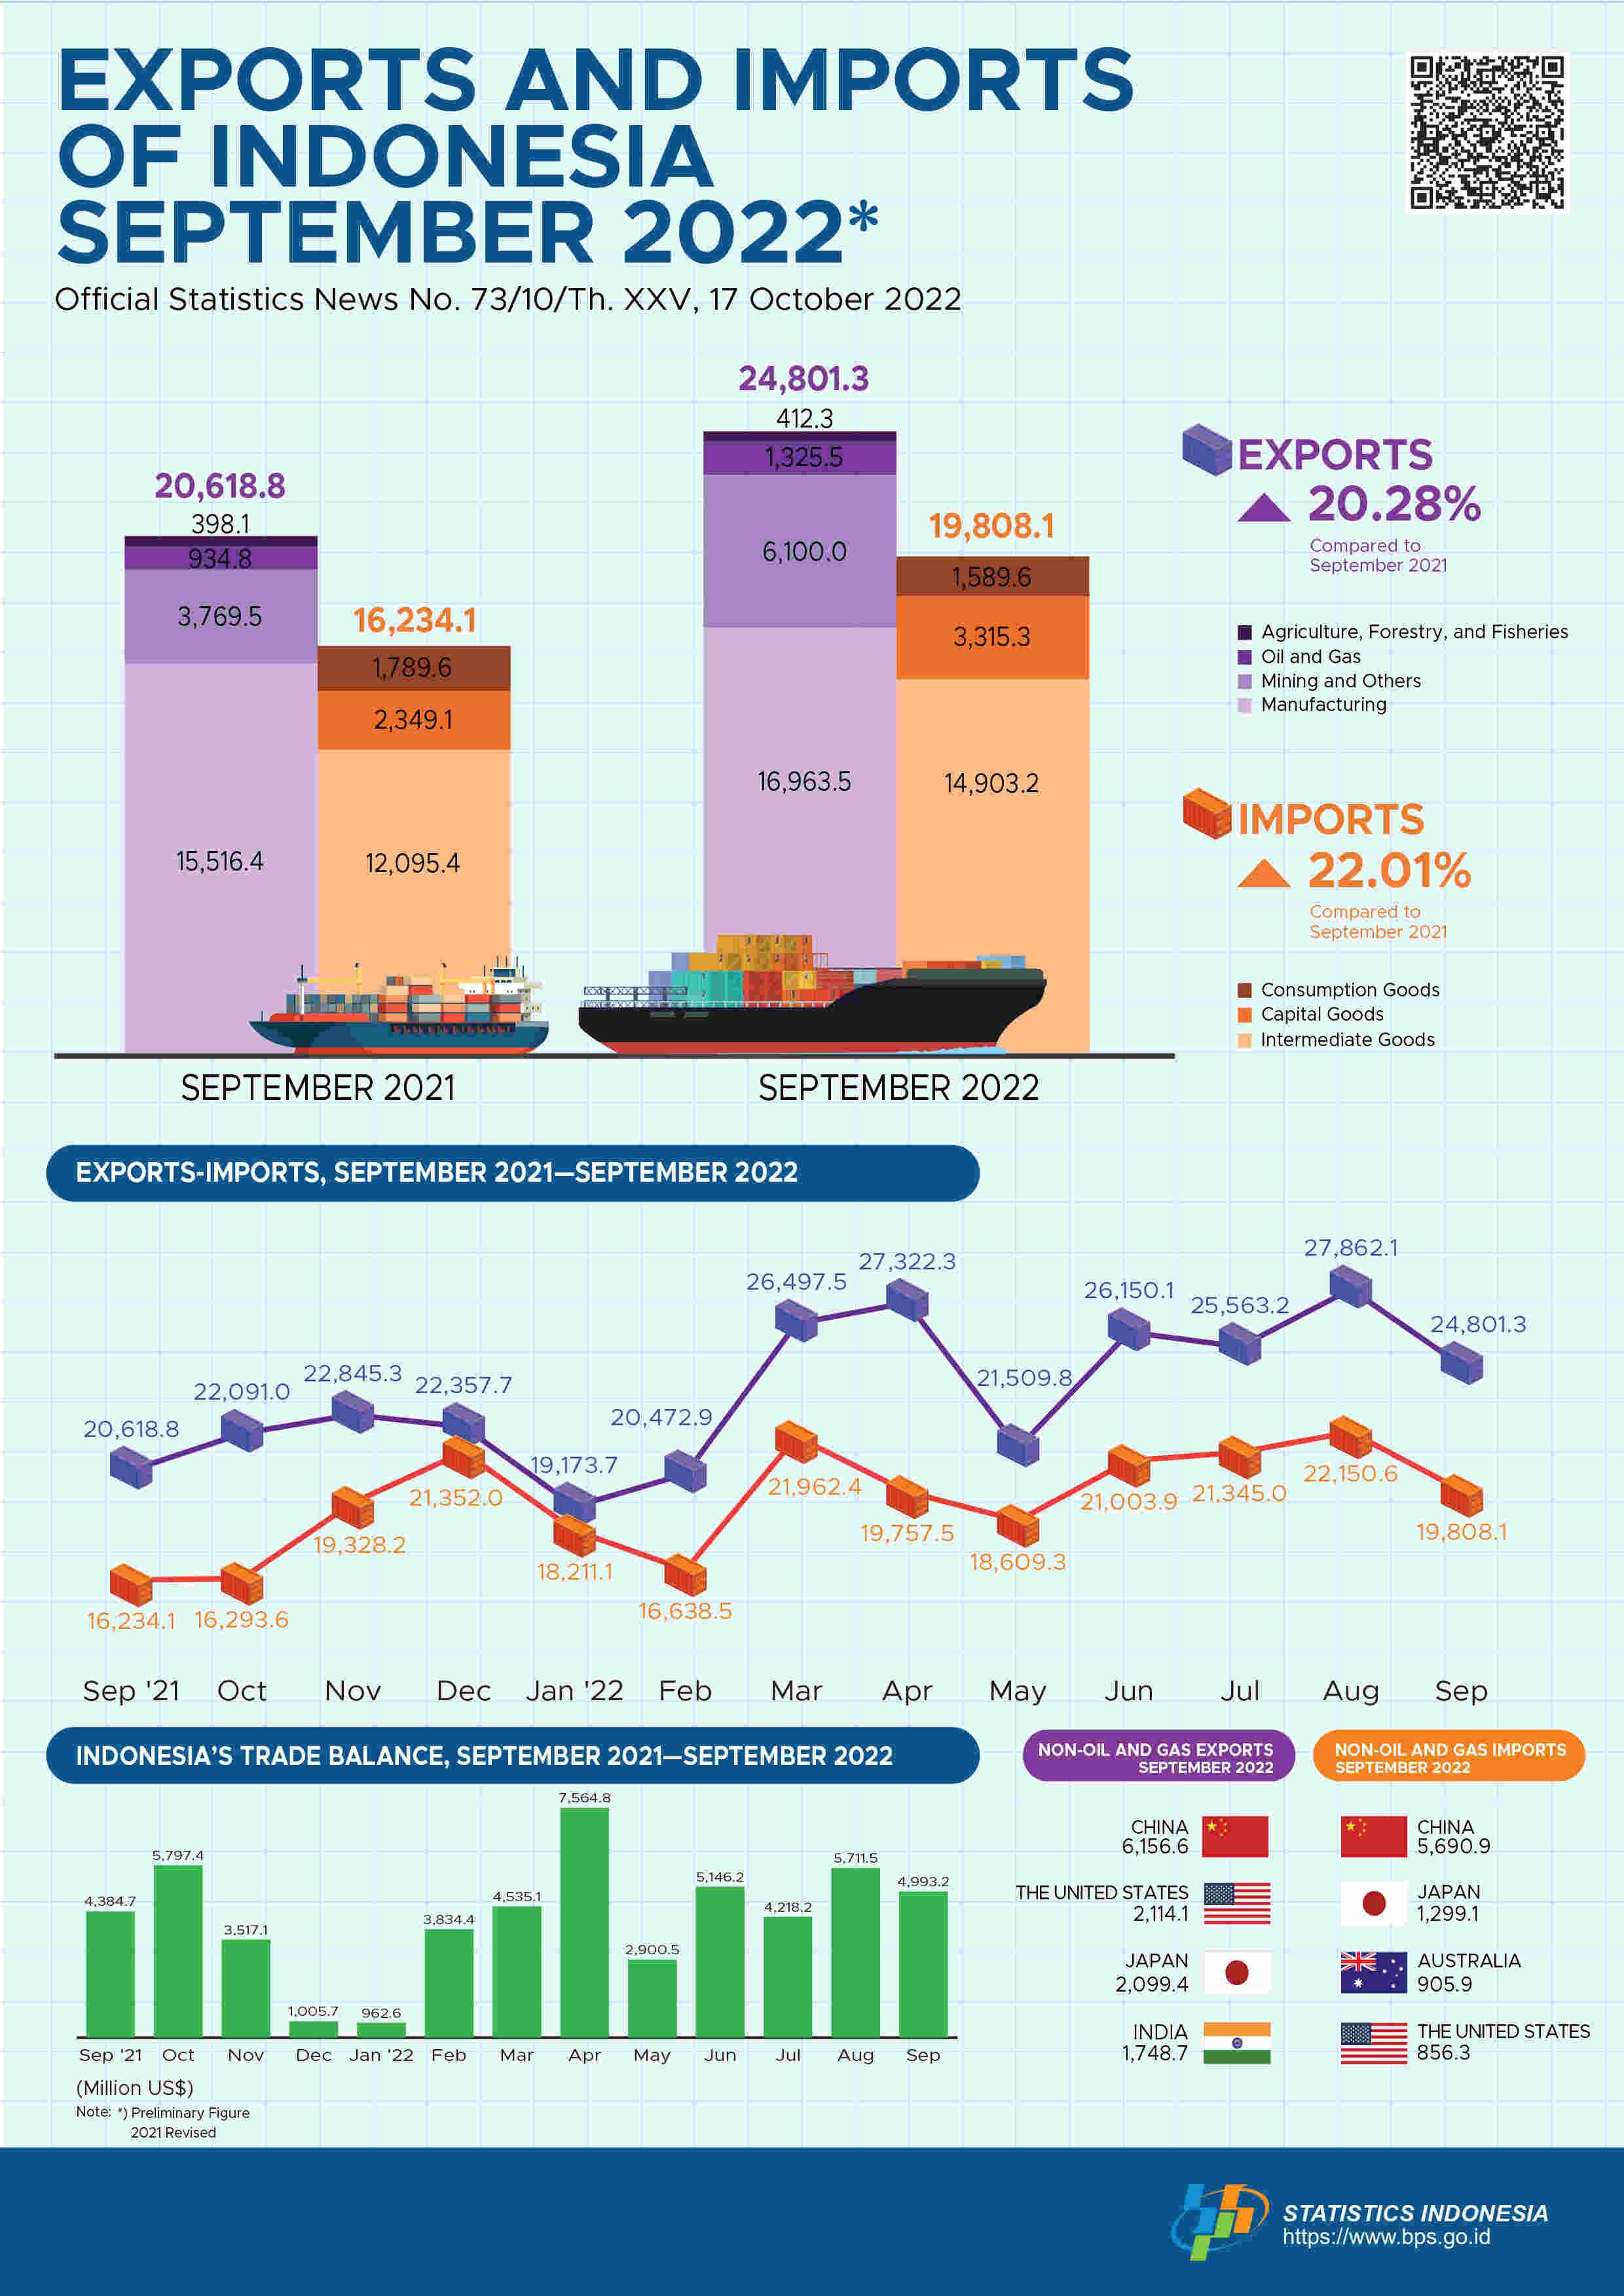 Exports in September 2022 reached US$24.80 billion & Imports in September 2022 reached US$19.81 billion.